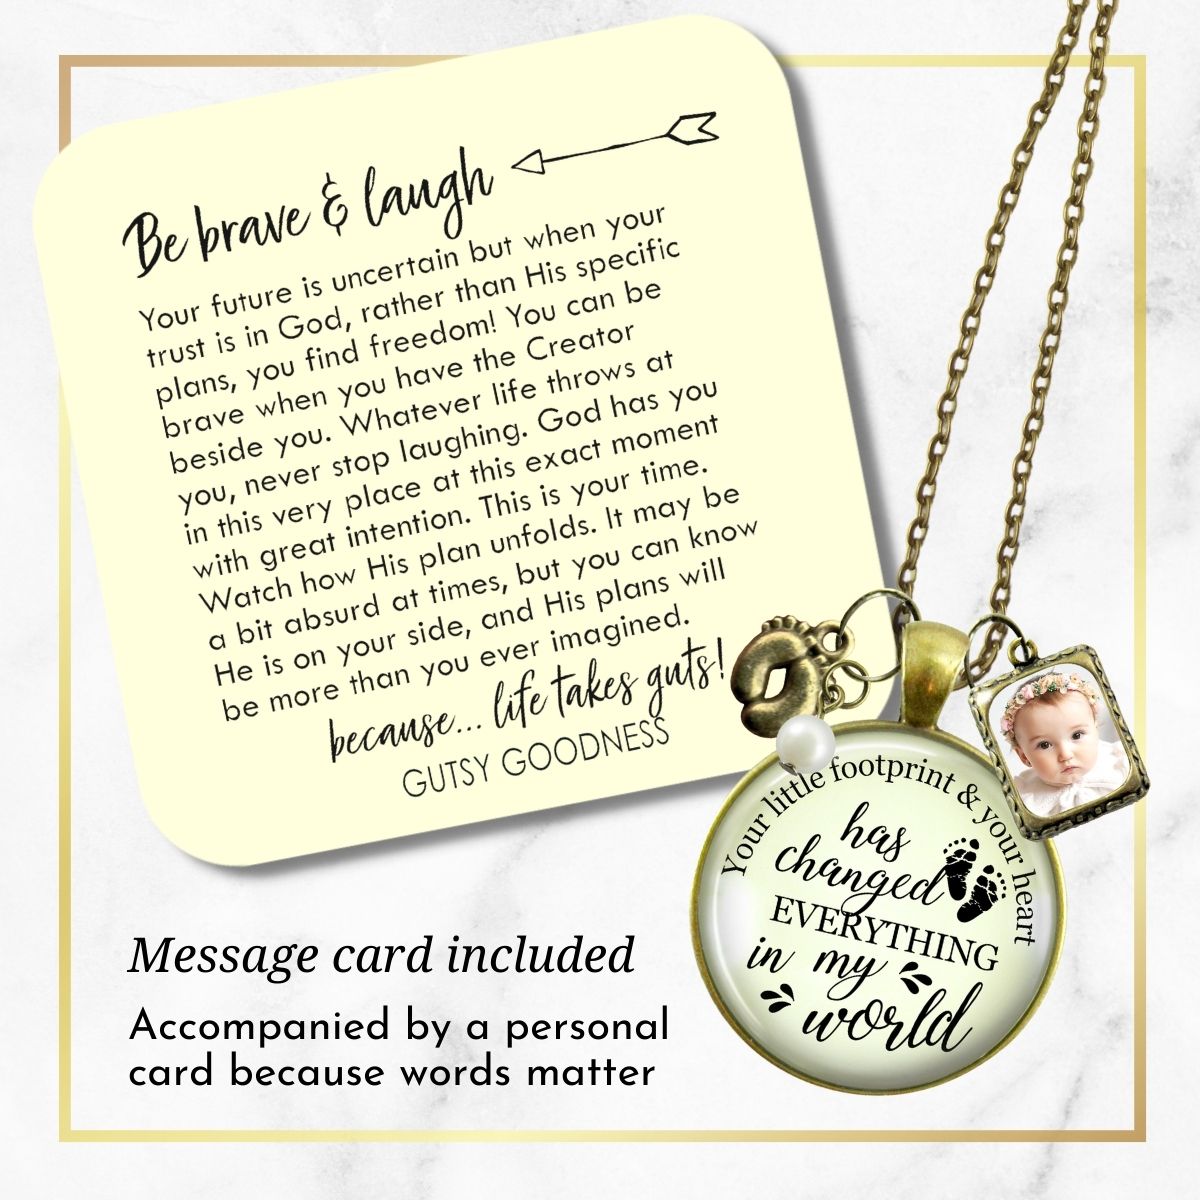 Handmade Gutsy Goodness Jewelry New Mom Necklace Your Little Footprint Gift Baby Feet & Photo Frame Charm, DIY Picture Template